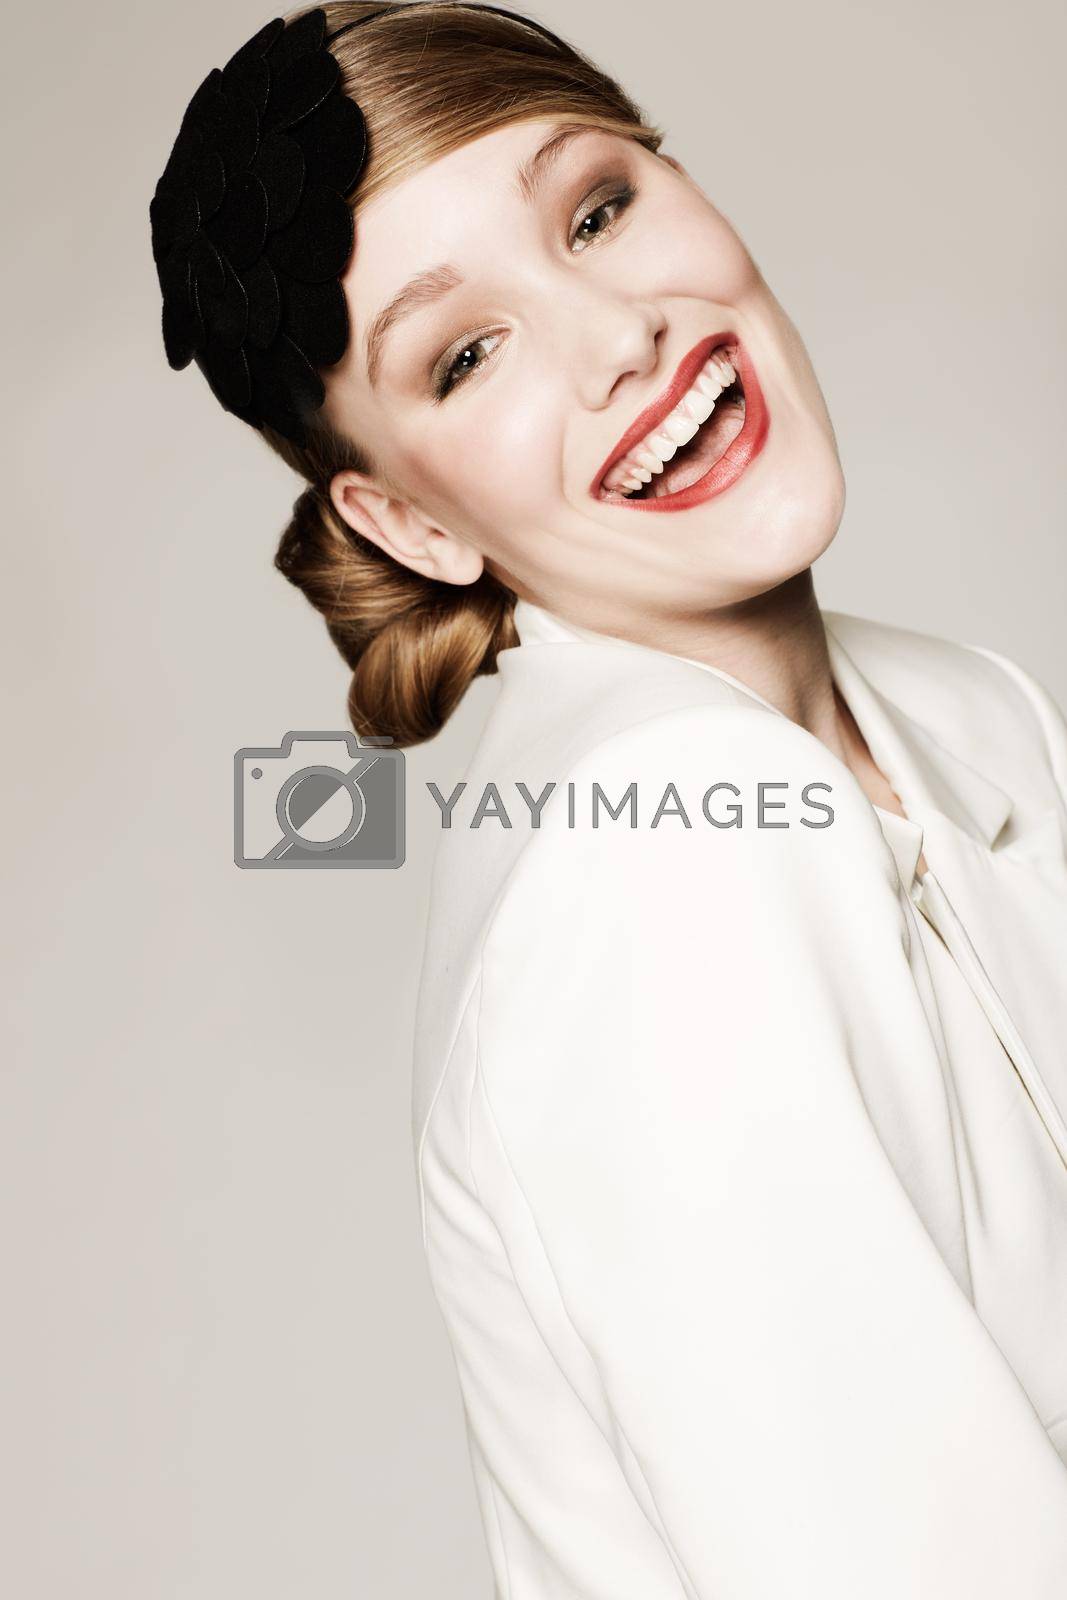 Royalty free image of Happy to be stylish. A gorgeous young woman in elegant clothes. by YuriArcurs